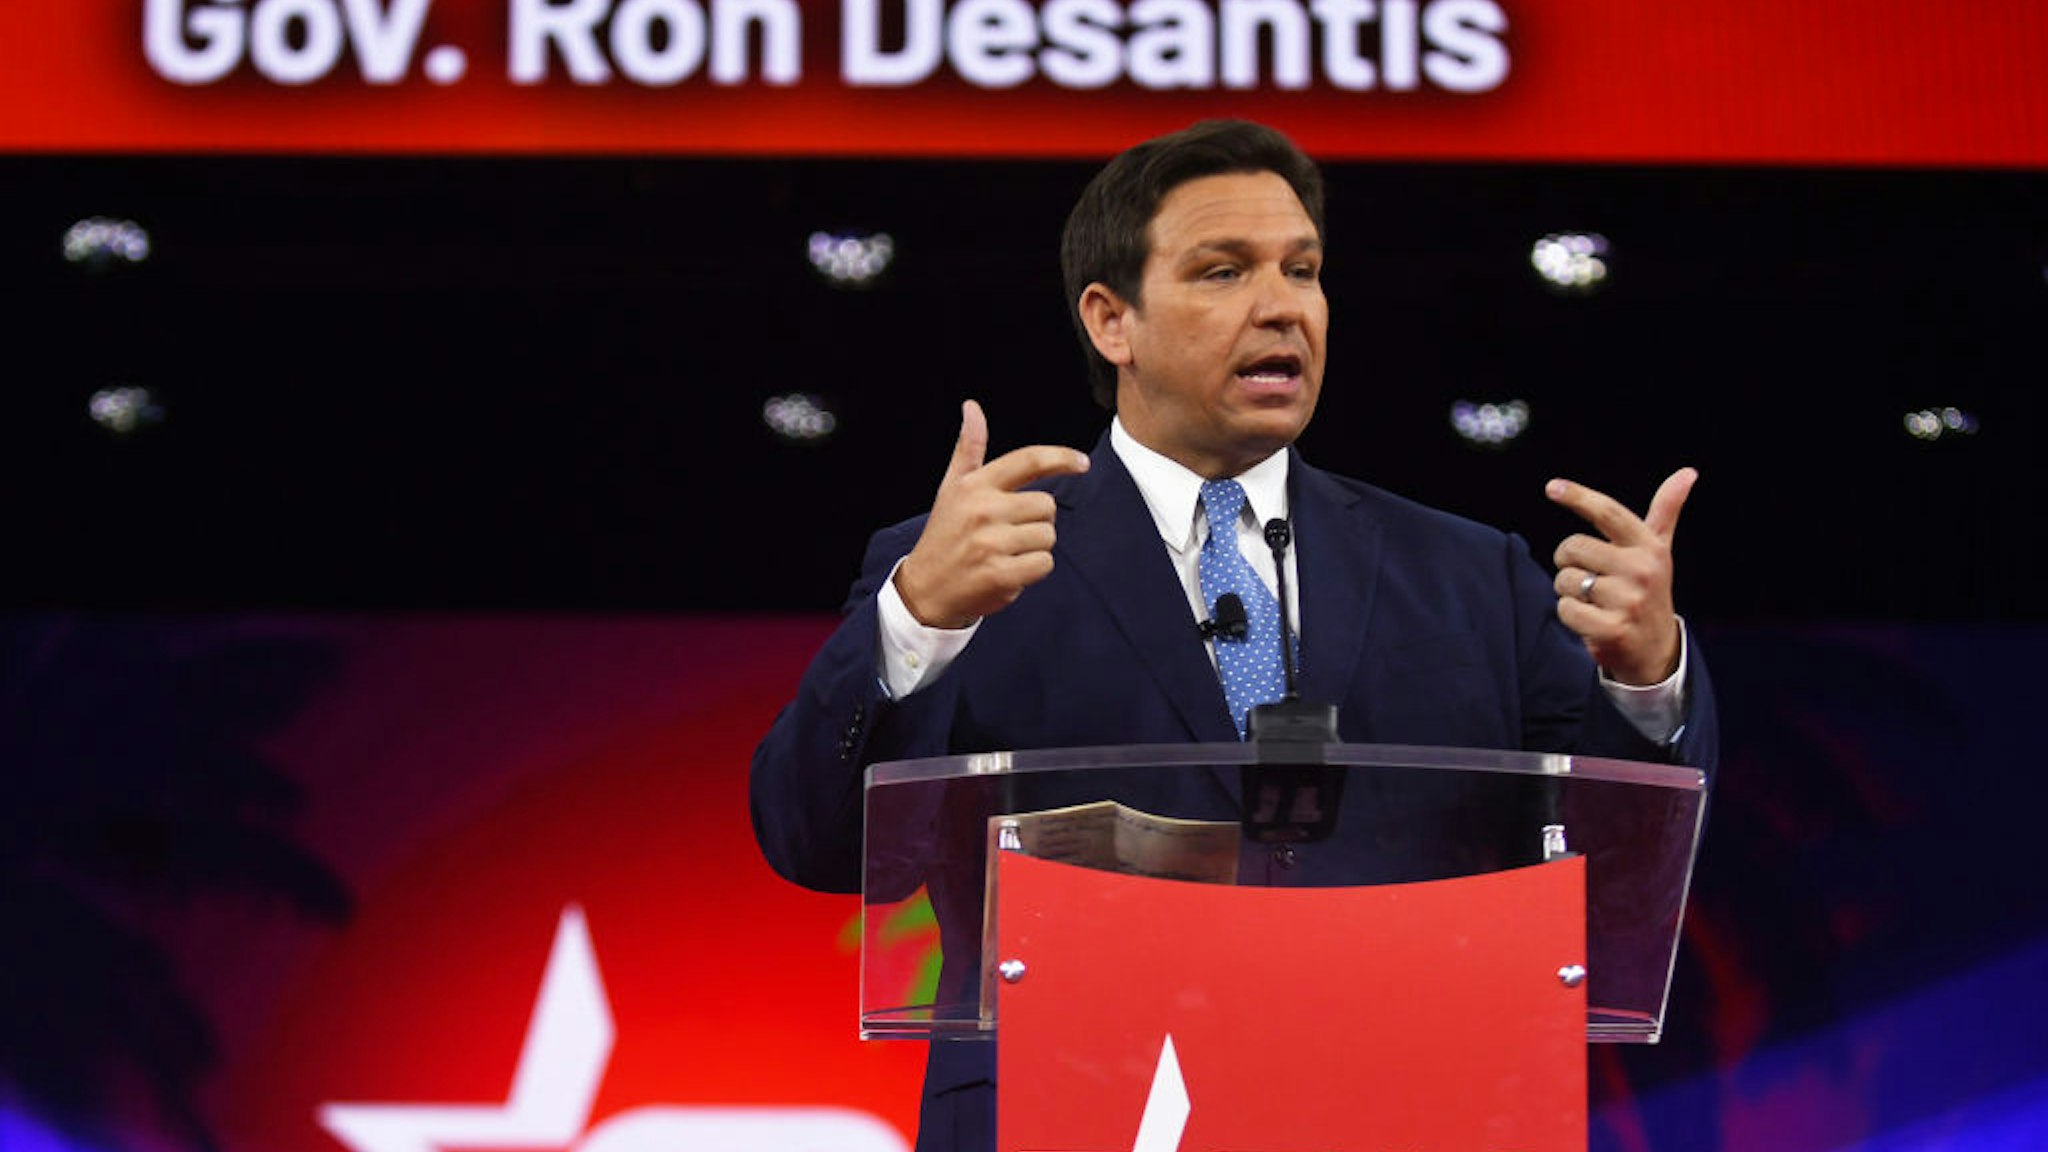 ORLANDO, FLORIDA, UNITED STATES - 2022/02/24: Florida Republican Governor Ron DeSantis addresses attendees on day one of the 2022 Conservative Political Action Conference (CPAC) in Orlando. Former U.S. President Donald Trump is also scheduled to speak at the four-day gathering of conservatives. (Photo by Paul Hennessy/SOPA Images/LightRocket via Getty Images)